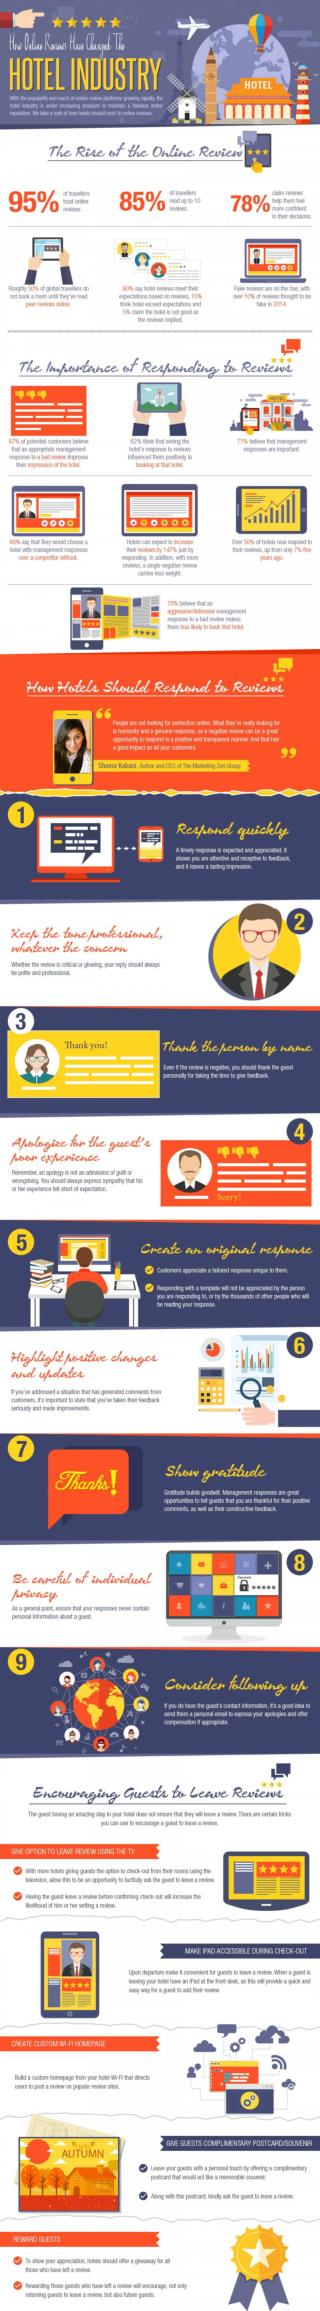 Info-graphics for Hoteliers: How to deal with Reviews